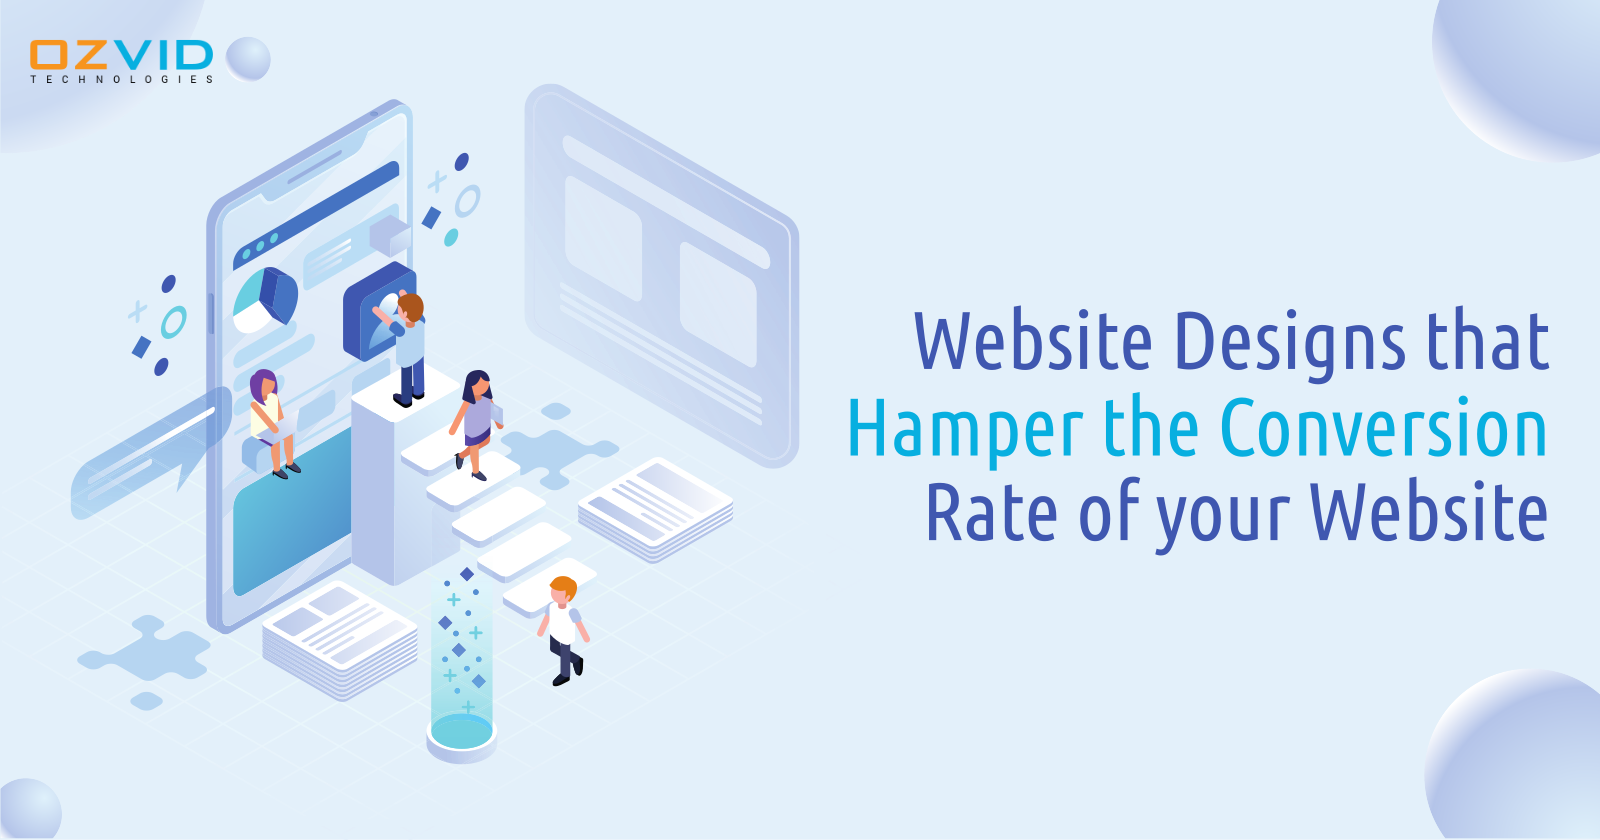 Website Designs that Hamper the Conversion Rate of your Website